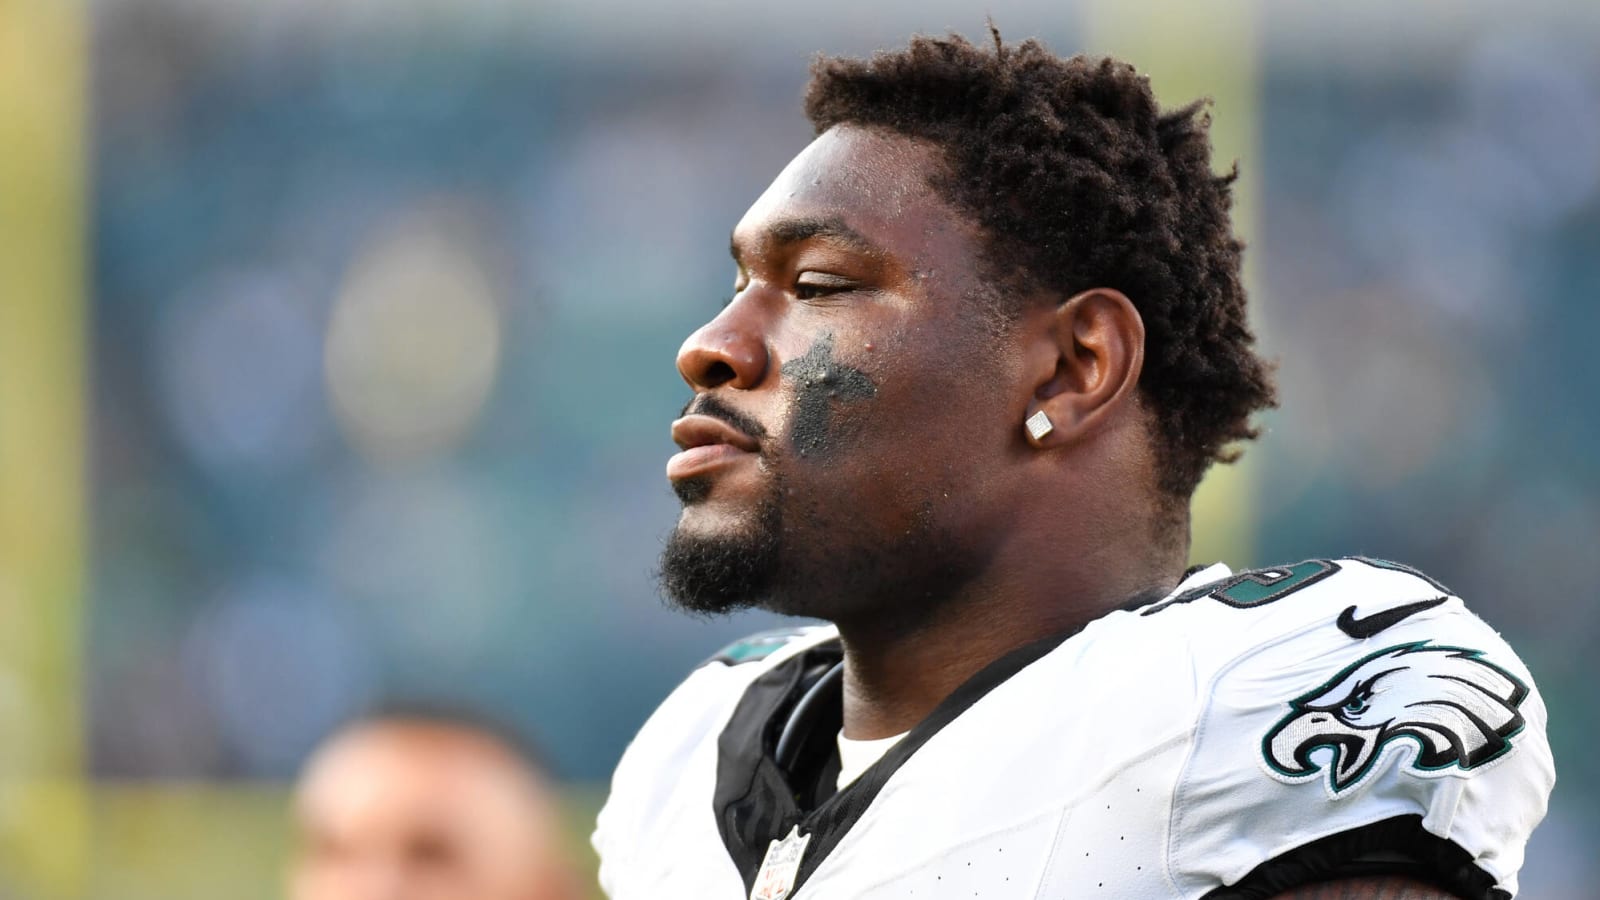 Eagles DE Betting on Himself Amid Roster Chase